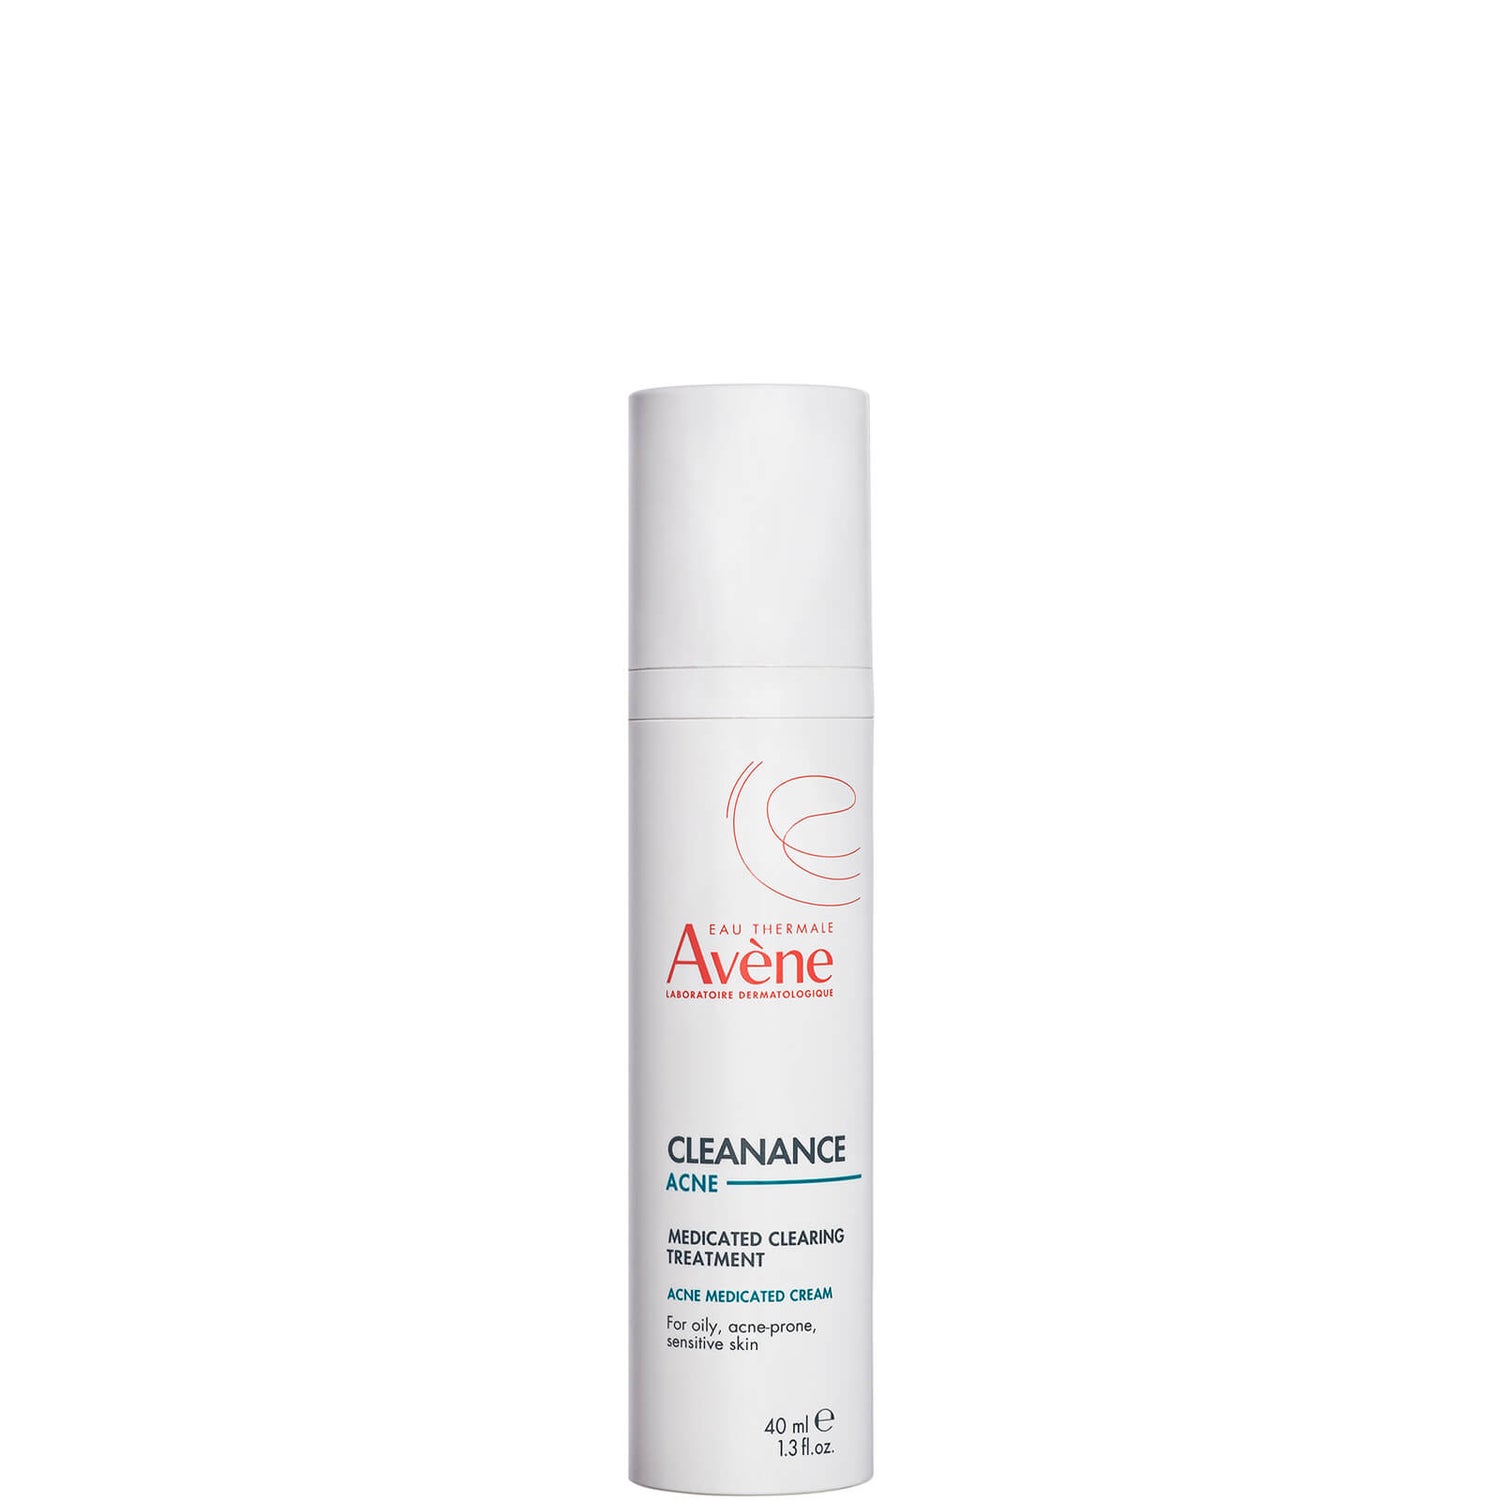 Avène Cleanance ACNE Medicated Clearing Treatment 1.3 fl. oz